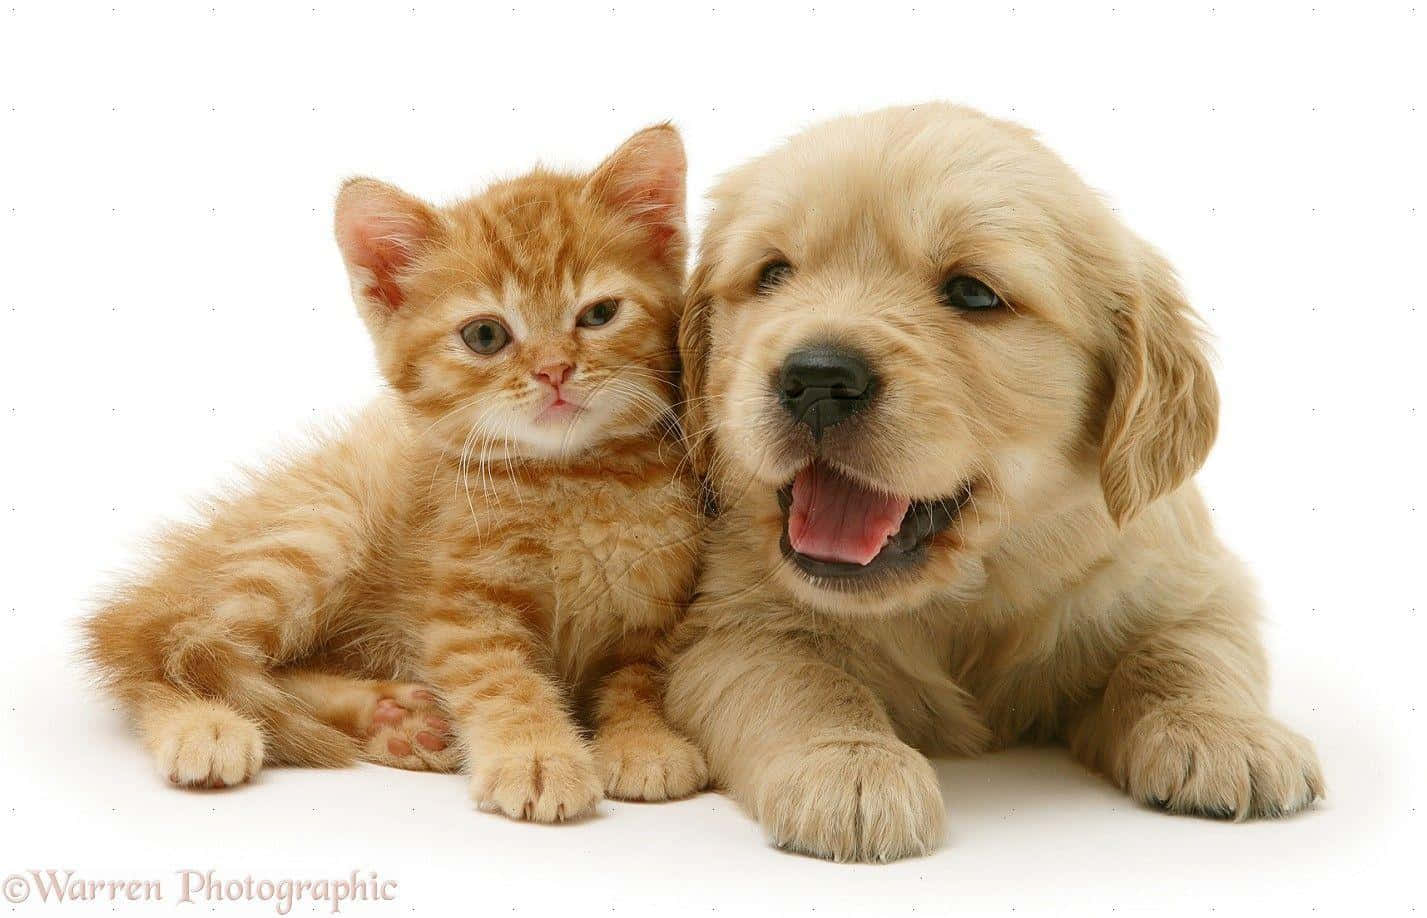 A Cute Tickle Fight Between A Kitten And A Puppy Background